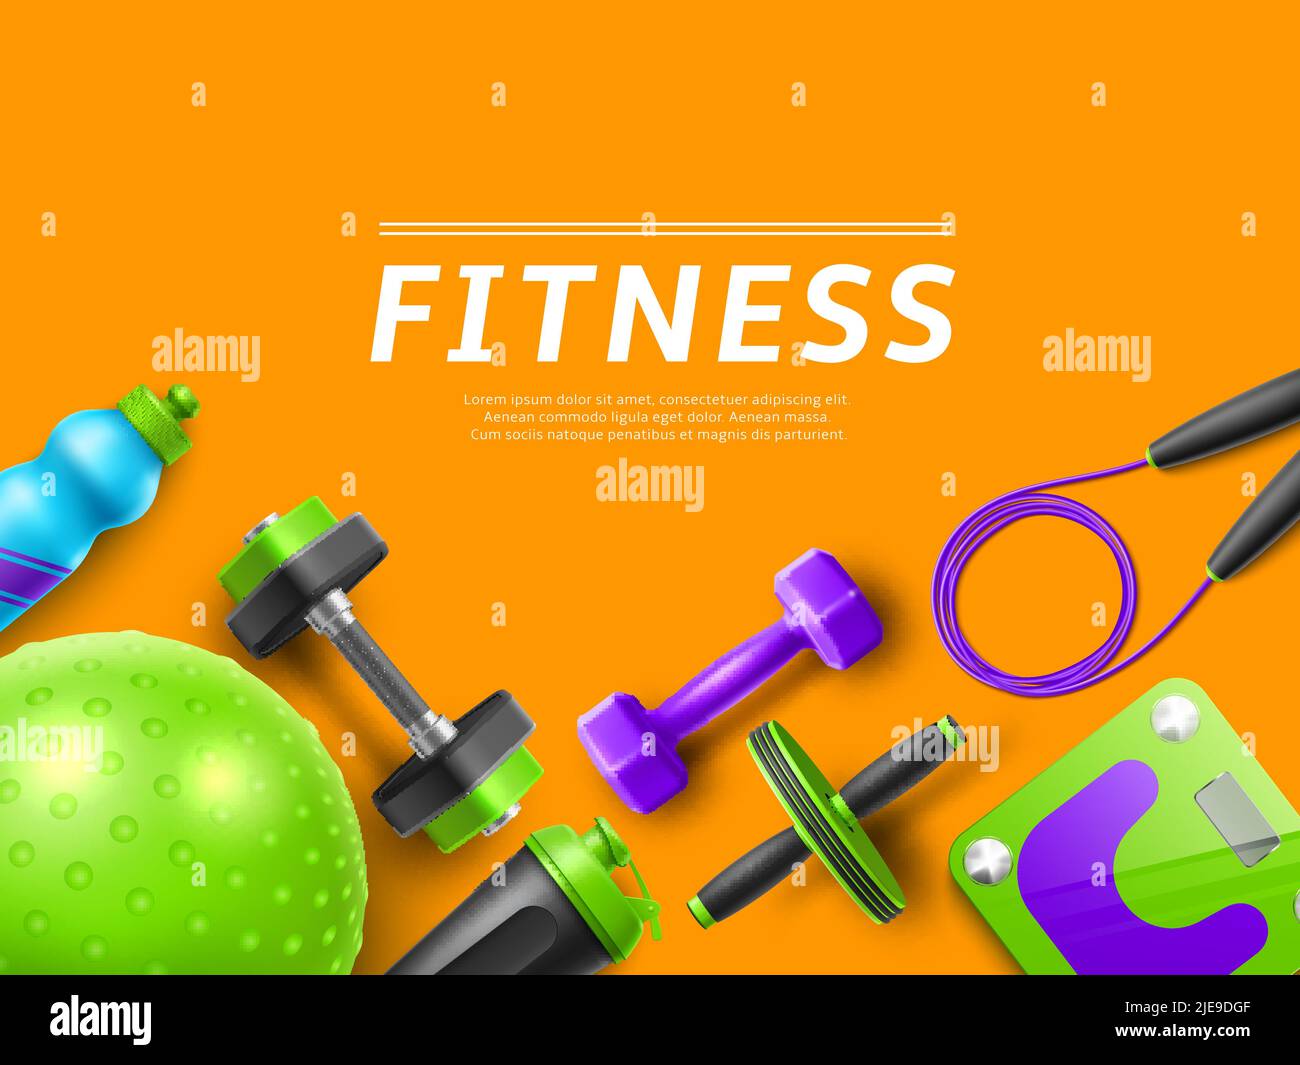 Realistic gym fitness accessories. Frame background with place for